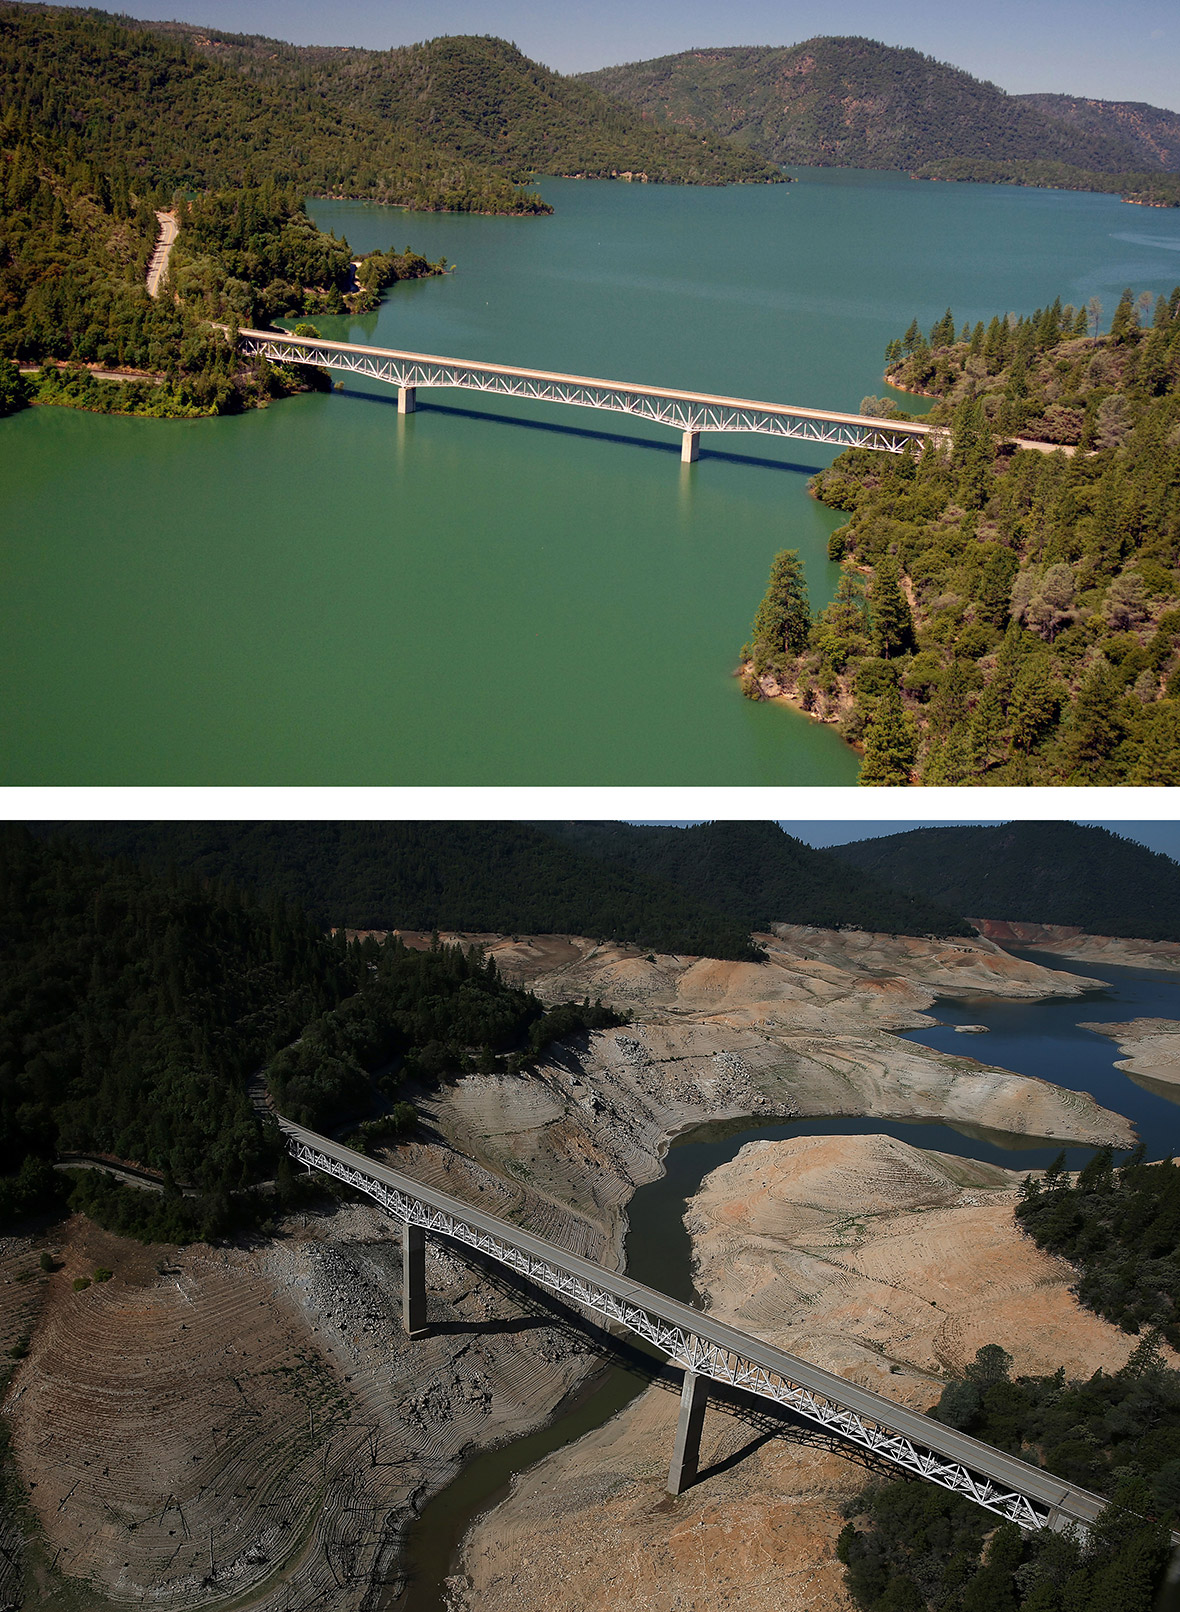 california-drought-before-and-after-photos-show-falling-water-levels